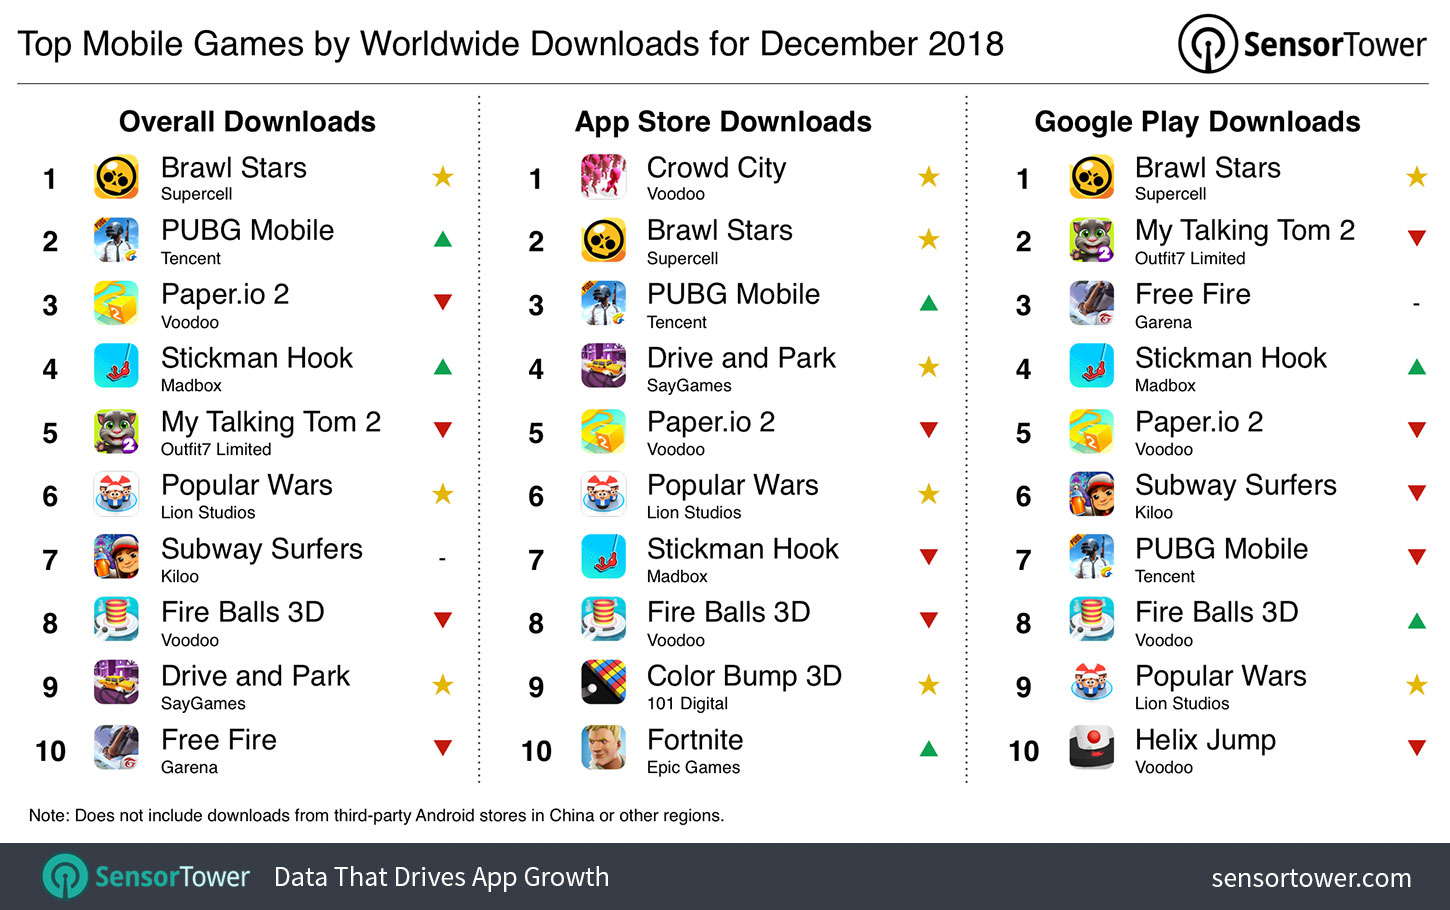 Top Mobile Games by Downloads for December 2018